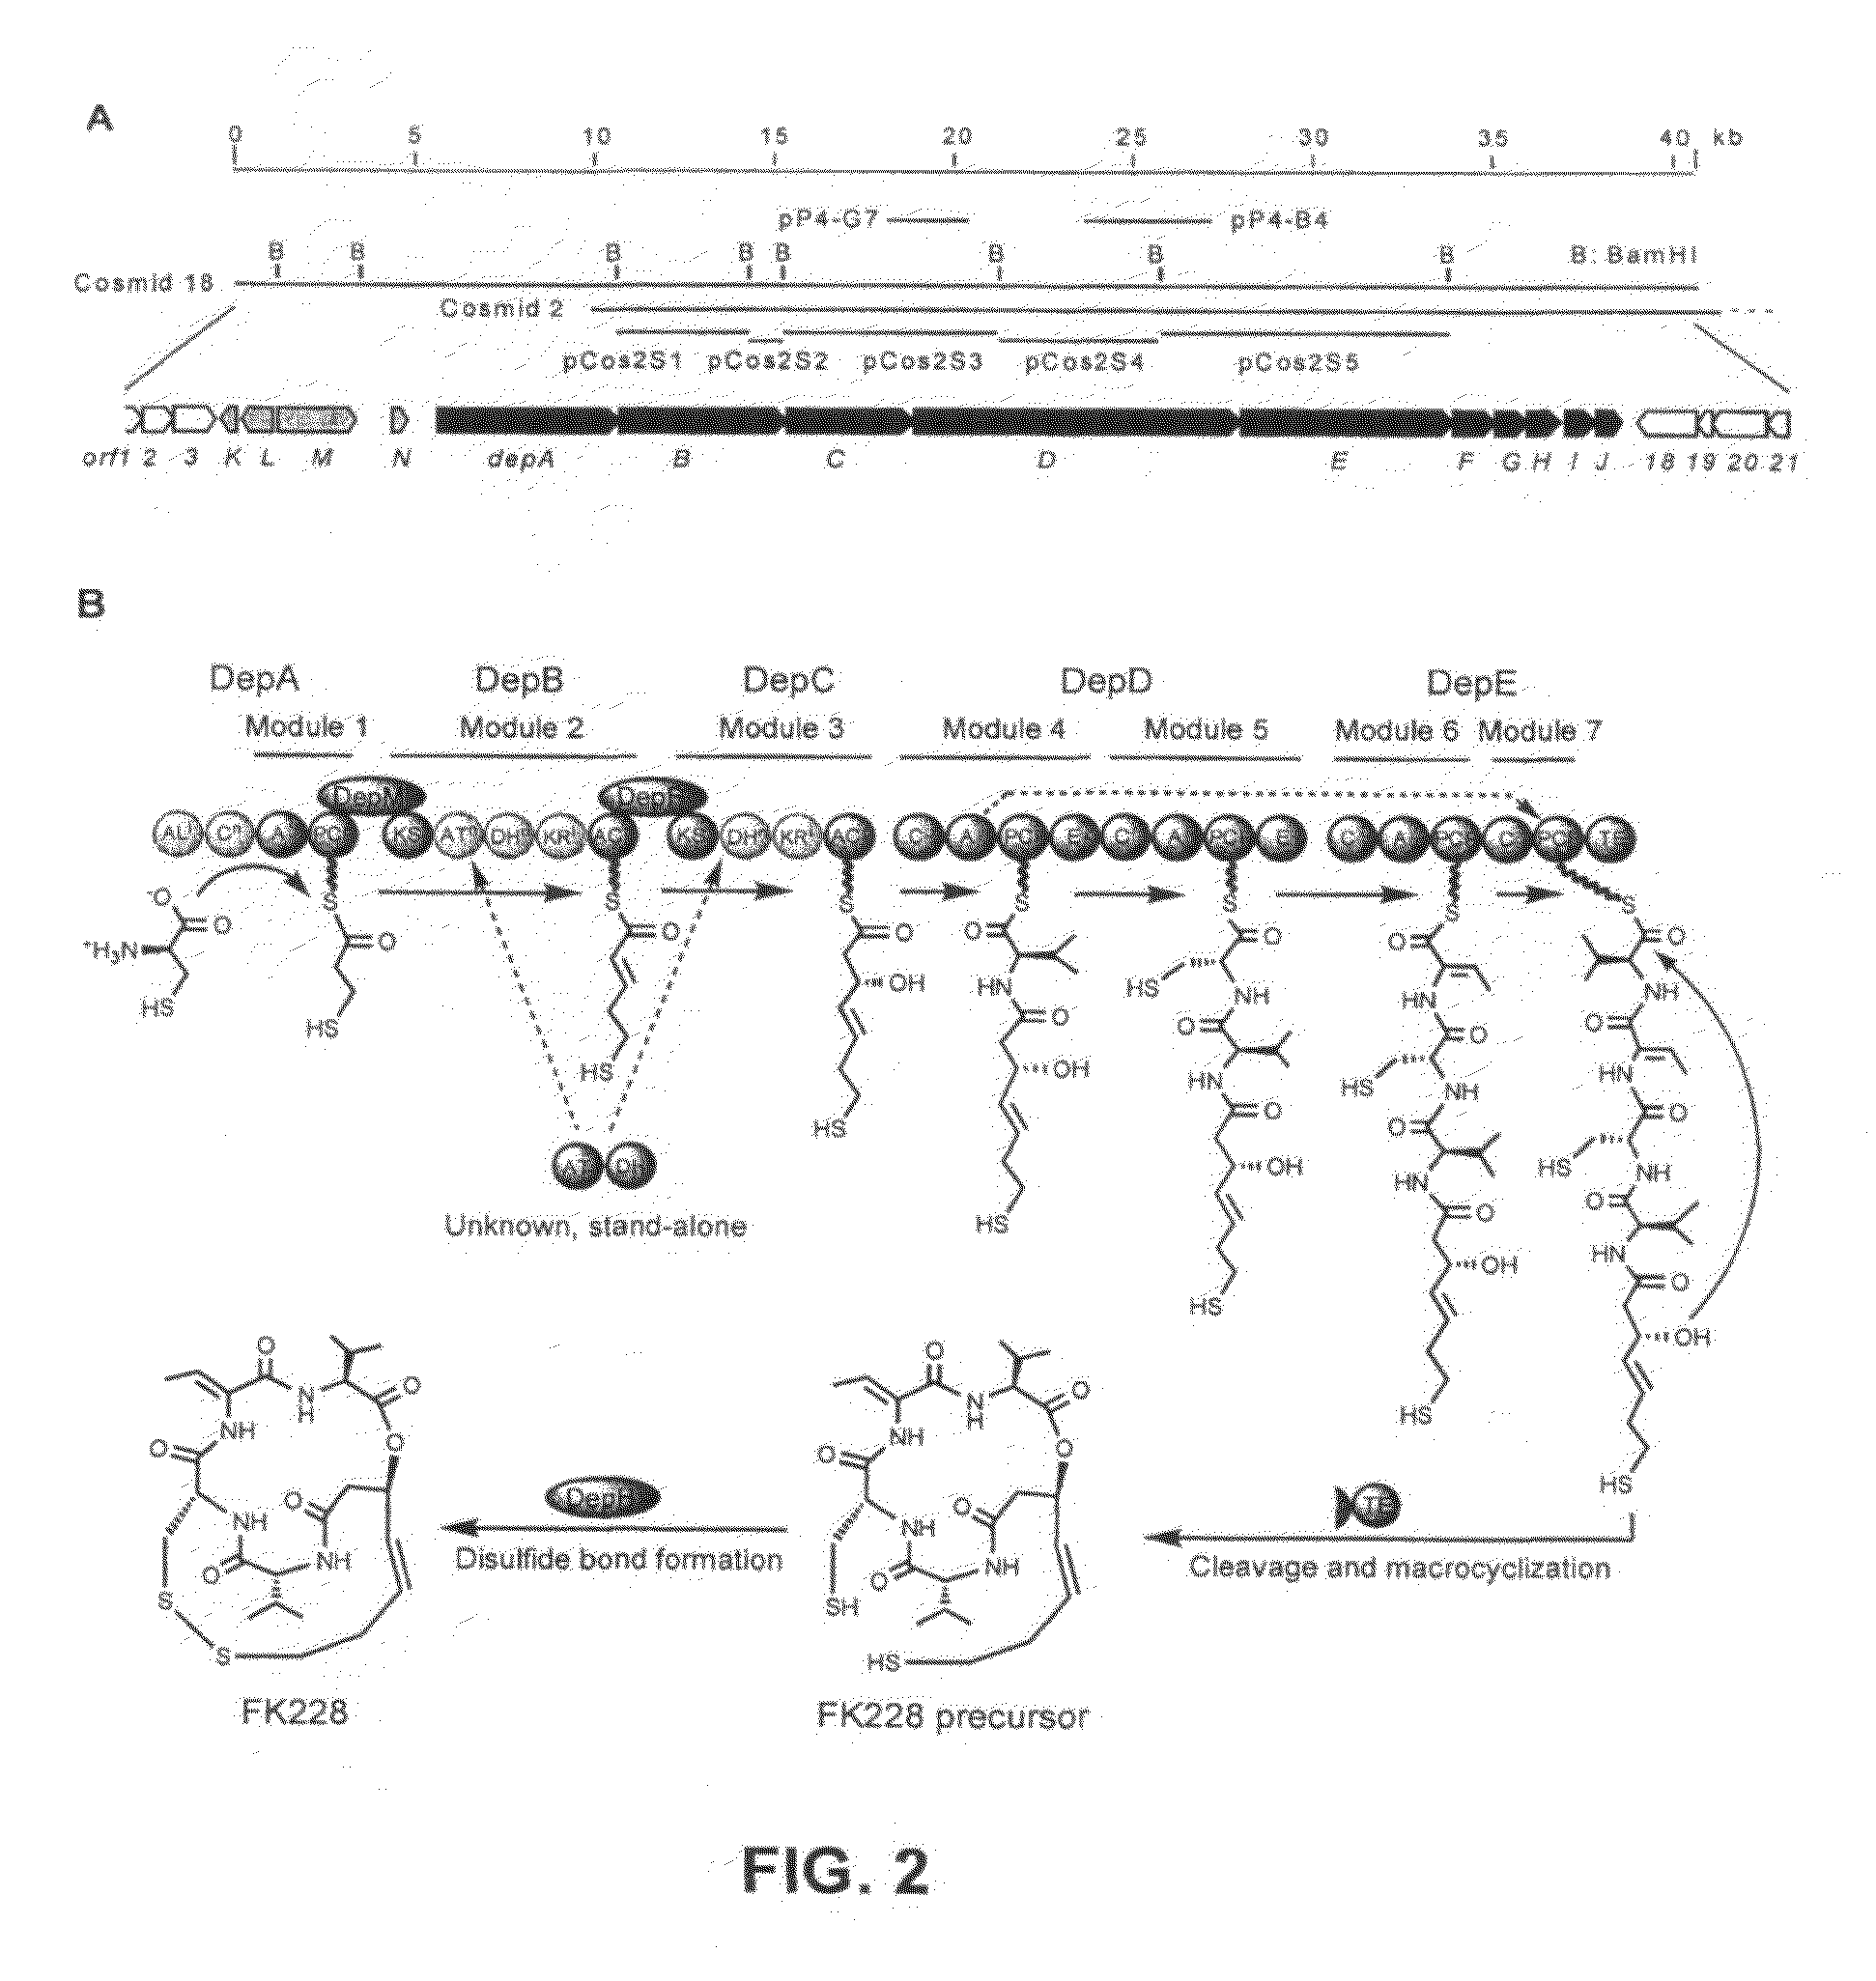 Sequences for FK228 biosynthesis and methods of synthesizing FK228 and FK228 analogs